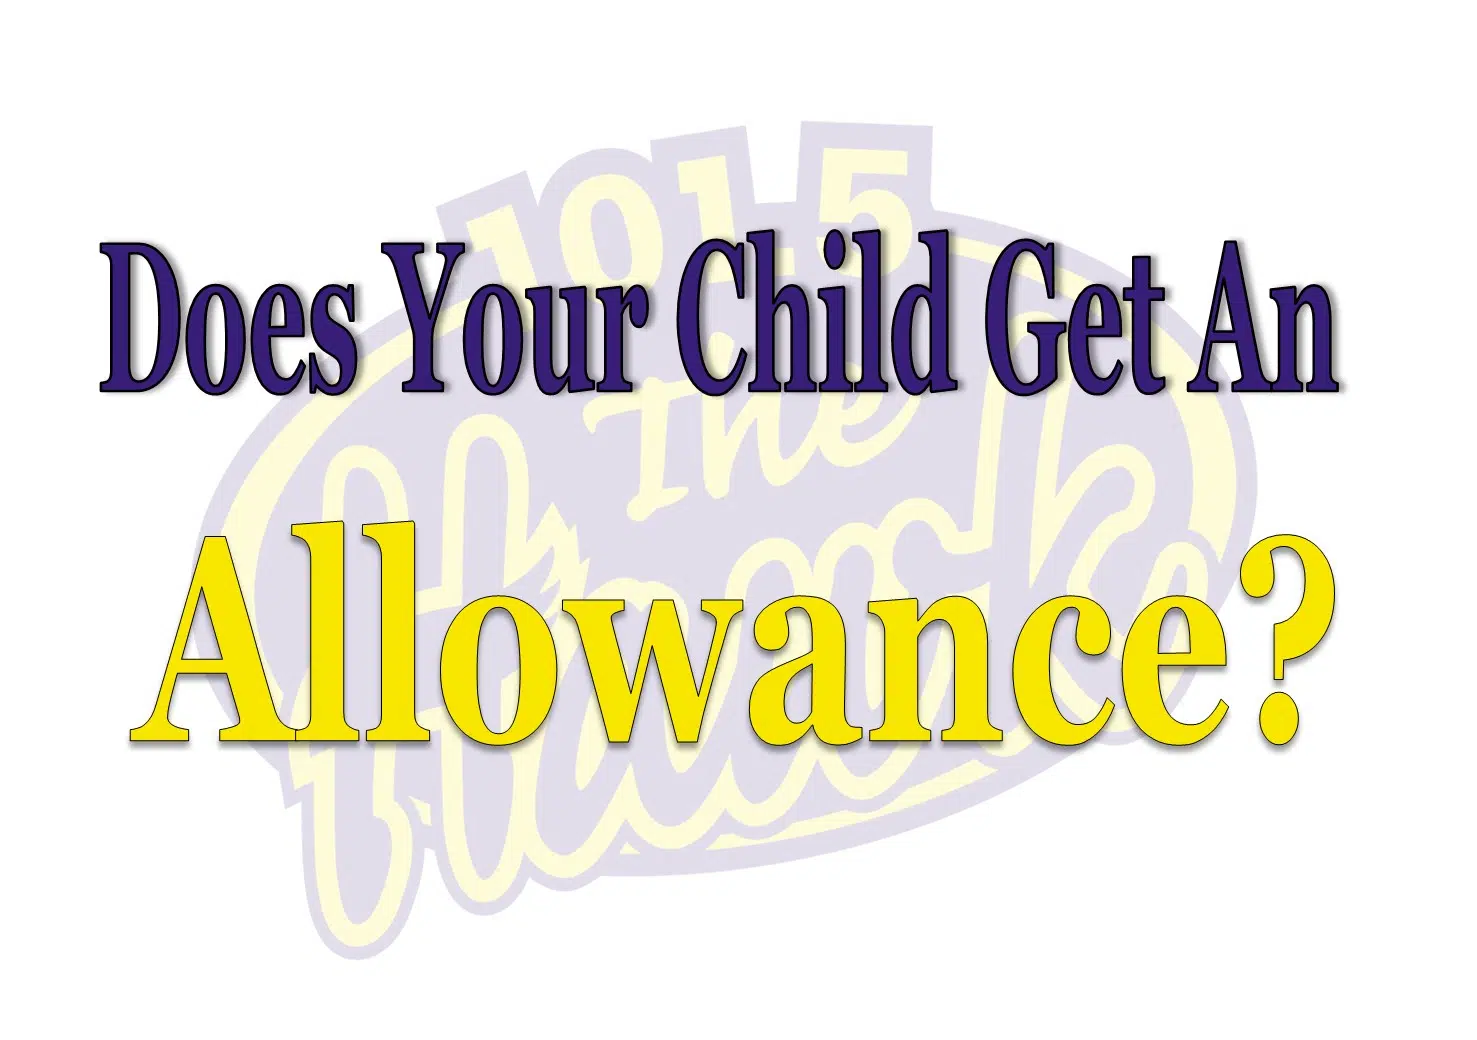 Does your child get an allowance?